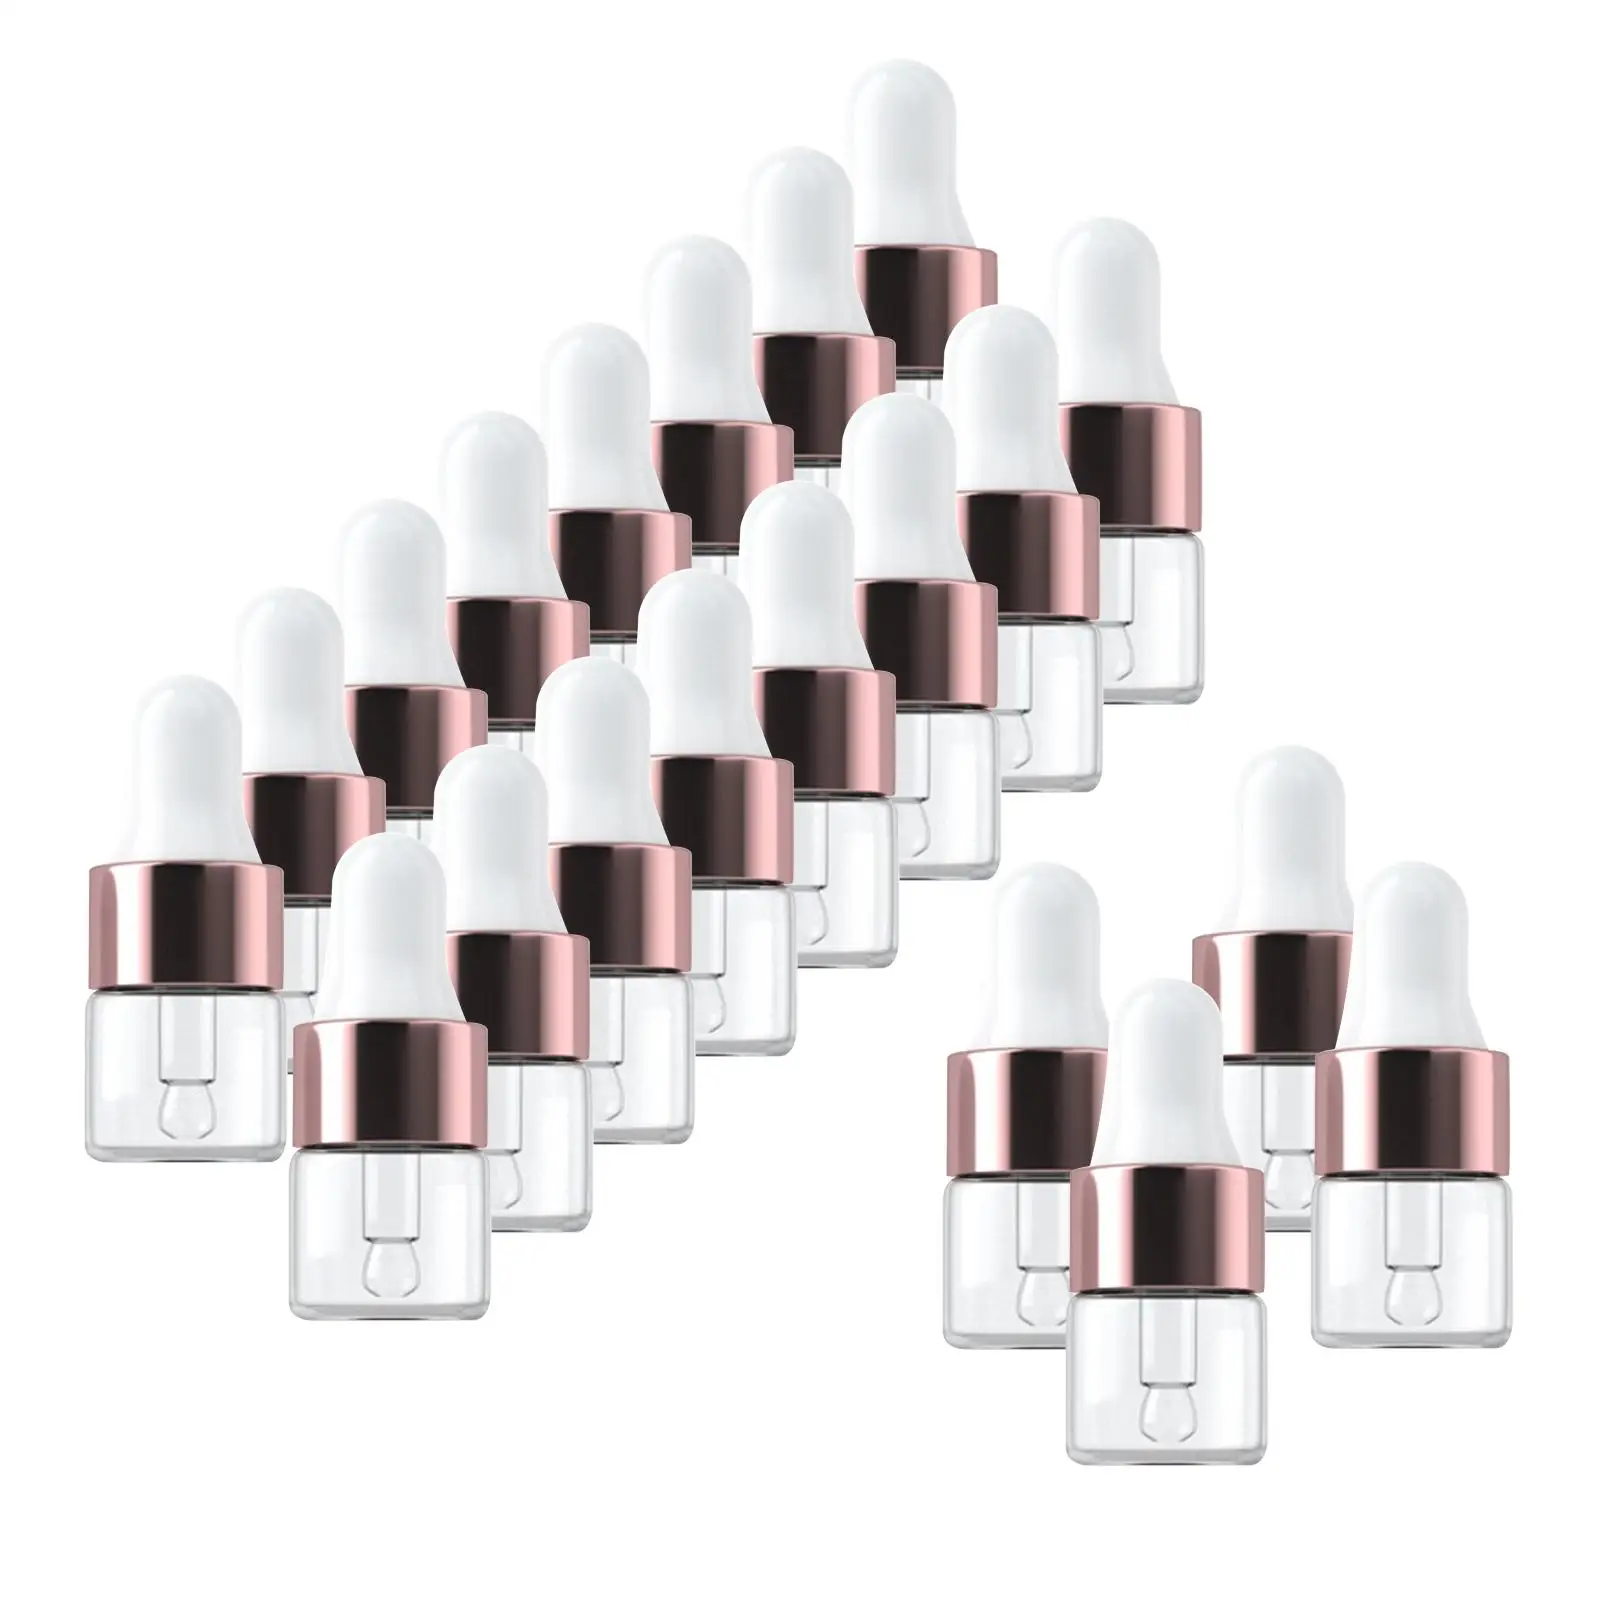 20Pcs Dropper Bottles with Caps Tip Applicator Containers Dropper Essential Oil Bottles for Eye Liquid Dropper Sample Travel